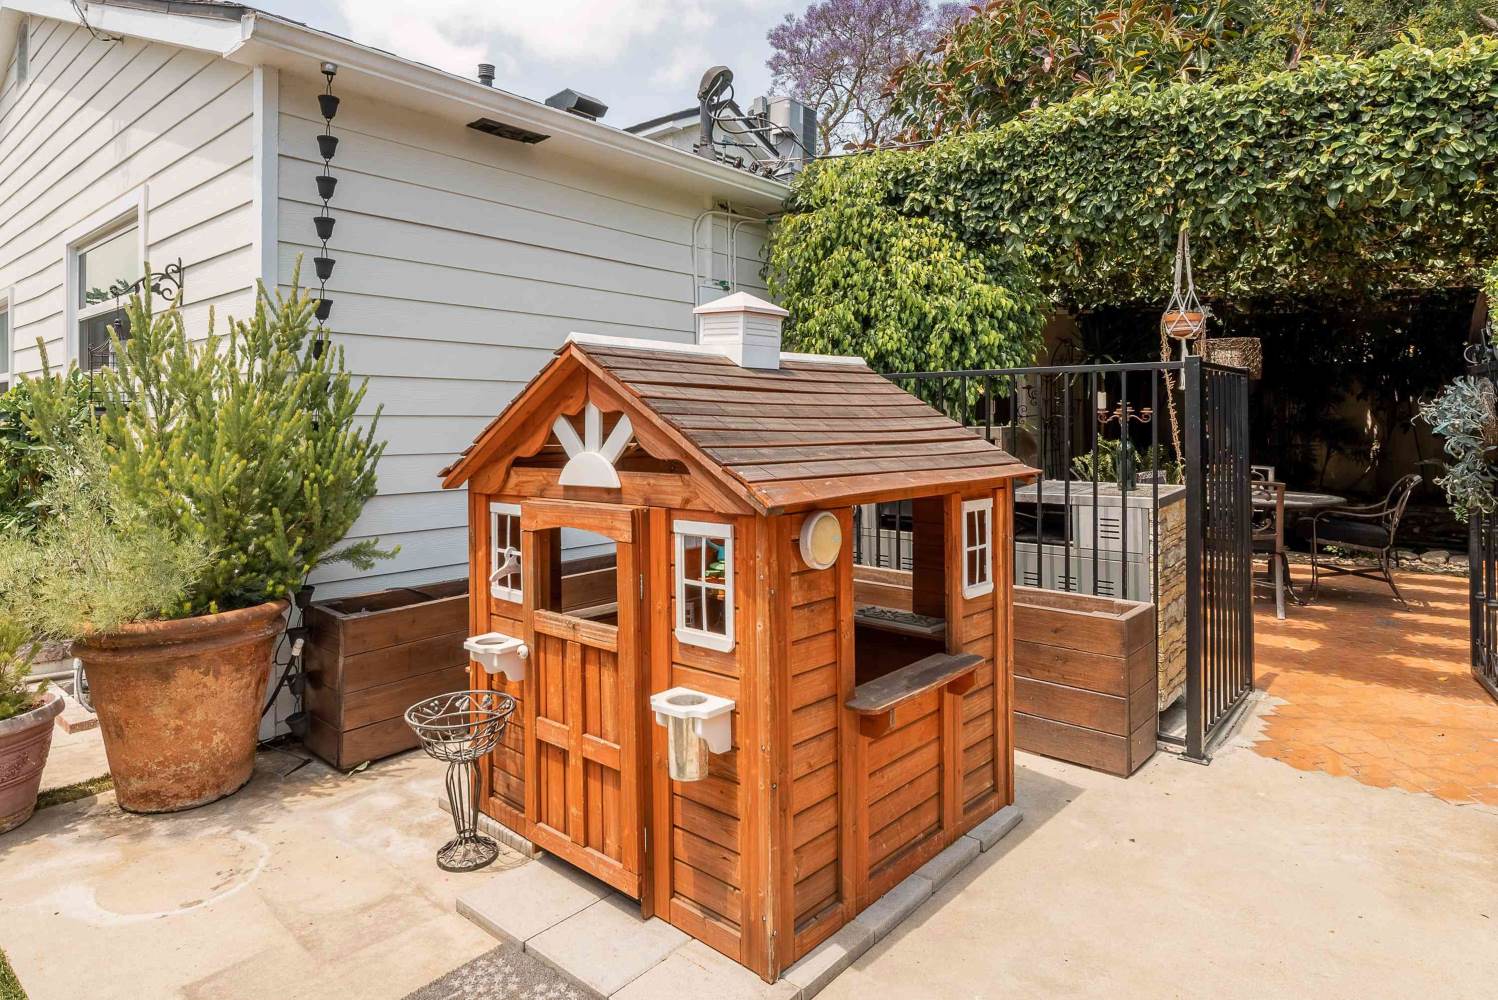 How To Build A Playhouse For Under $100